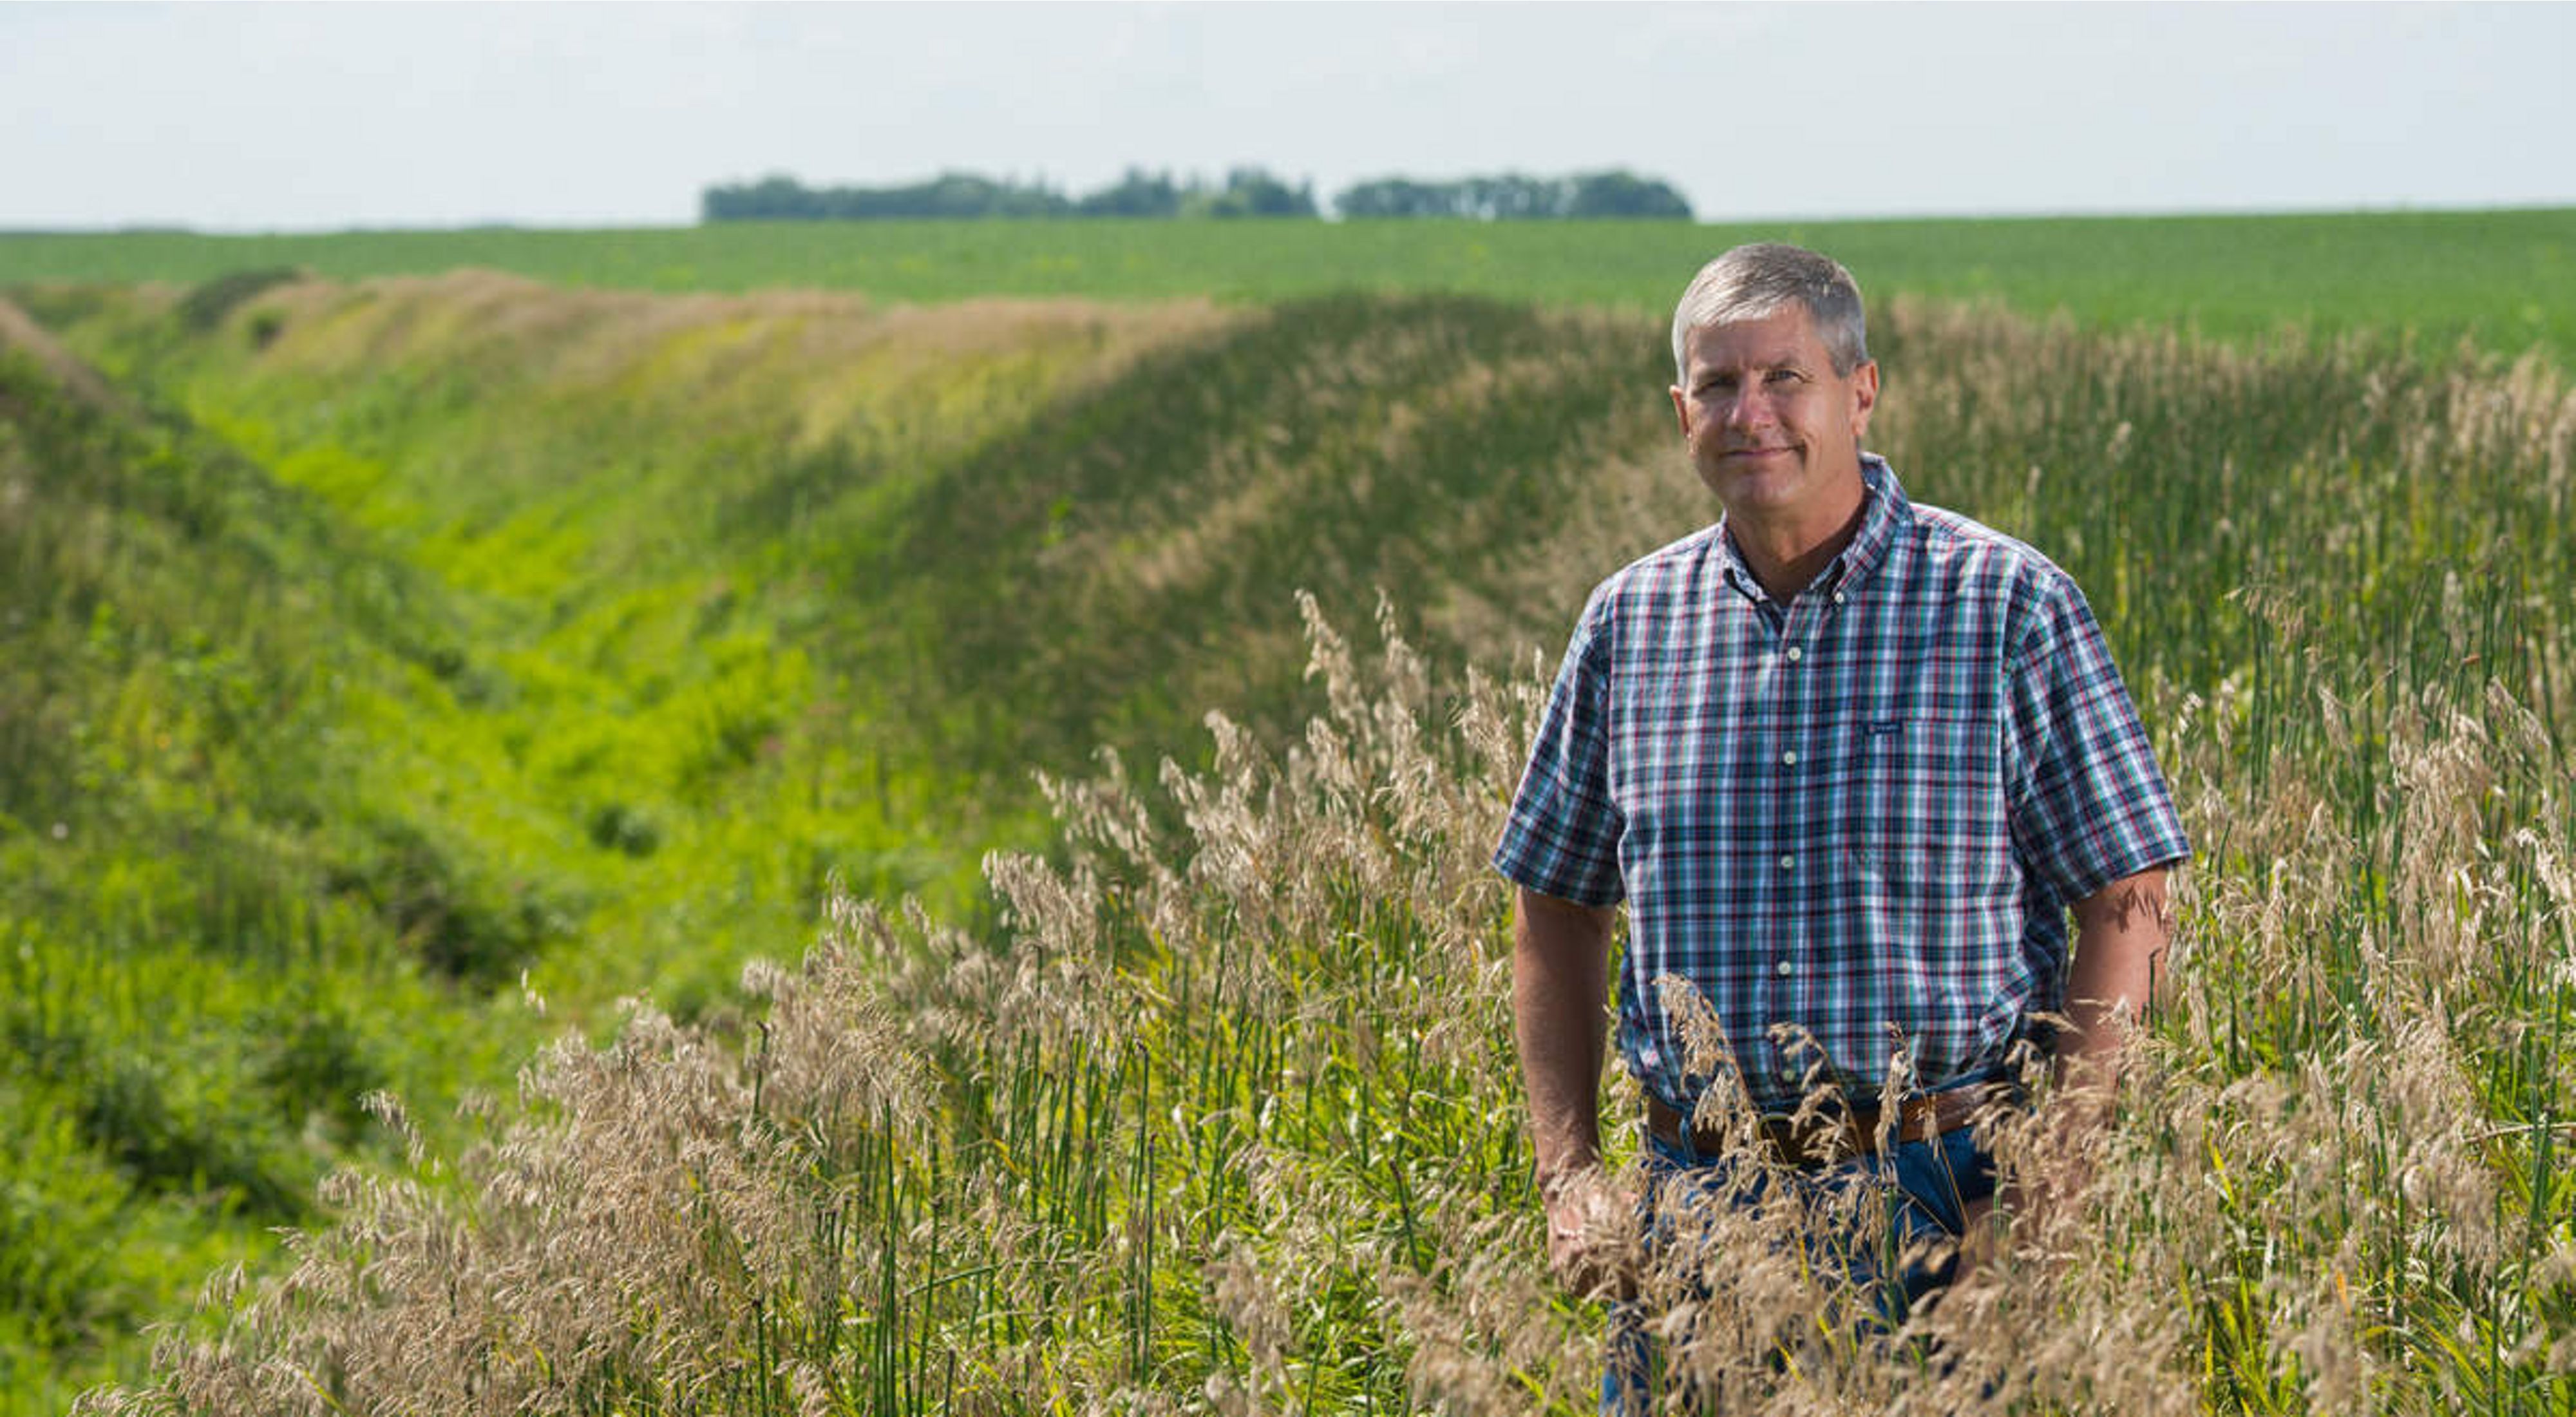 A man in blue plaid shirt standing in an agricultural field.